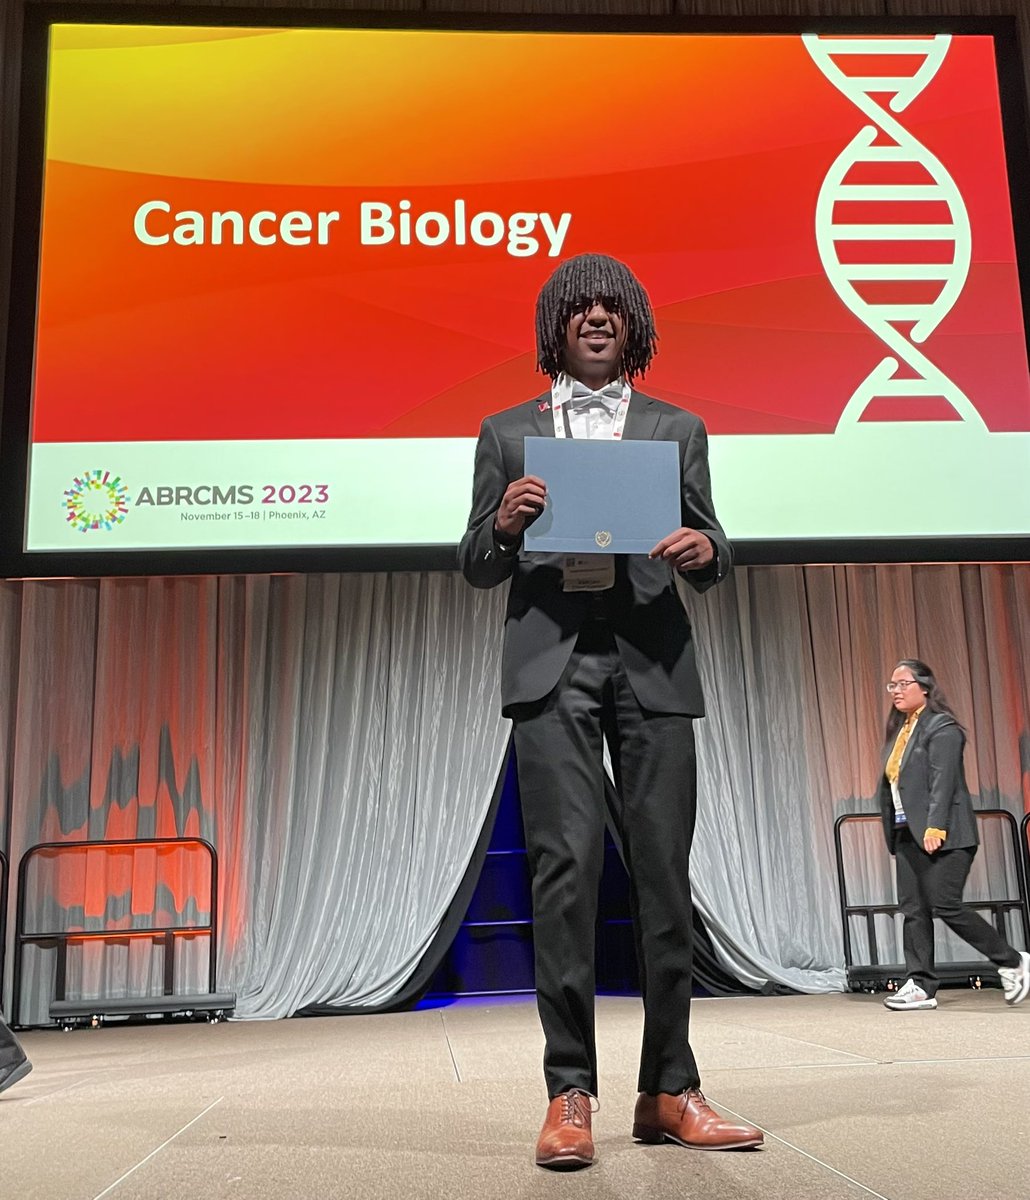 Congratulations to Yonathan Janka, graduate of our HEART summer program, on receiving a cancer biology poster presentation award @ABRCMS for his research performed in Dr. Humsa Venkatesh’s lab @BrighamWomens @harvardmed. WAY TO GO!